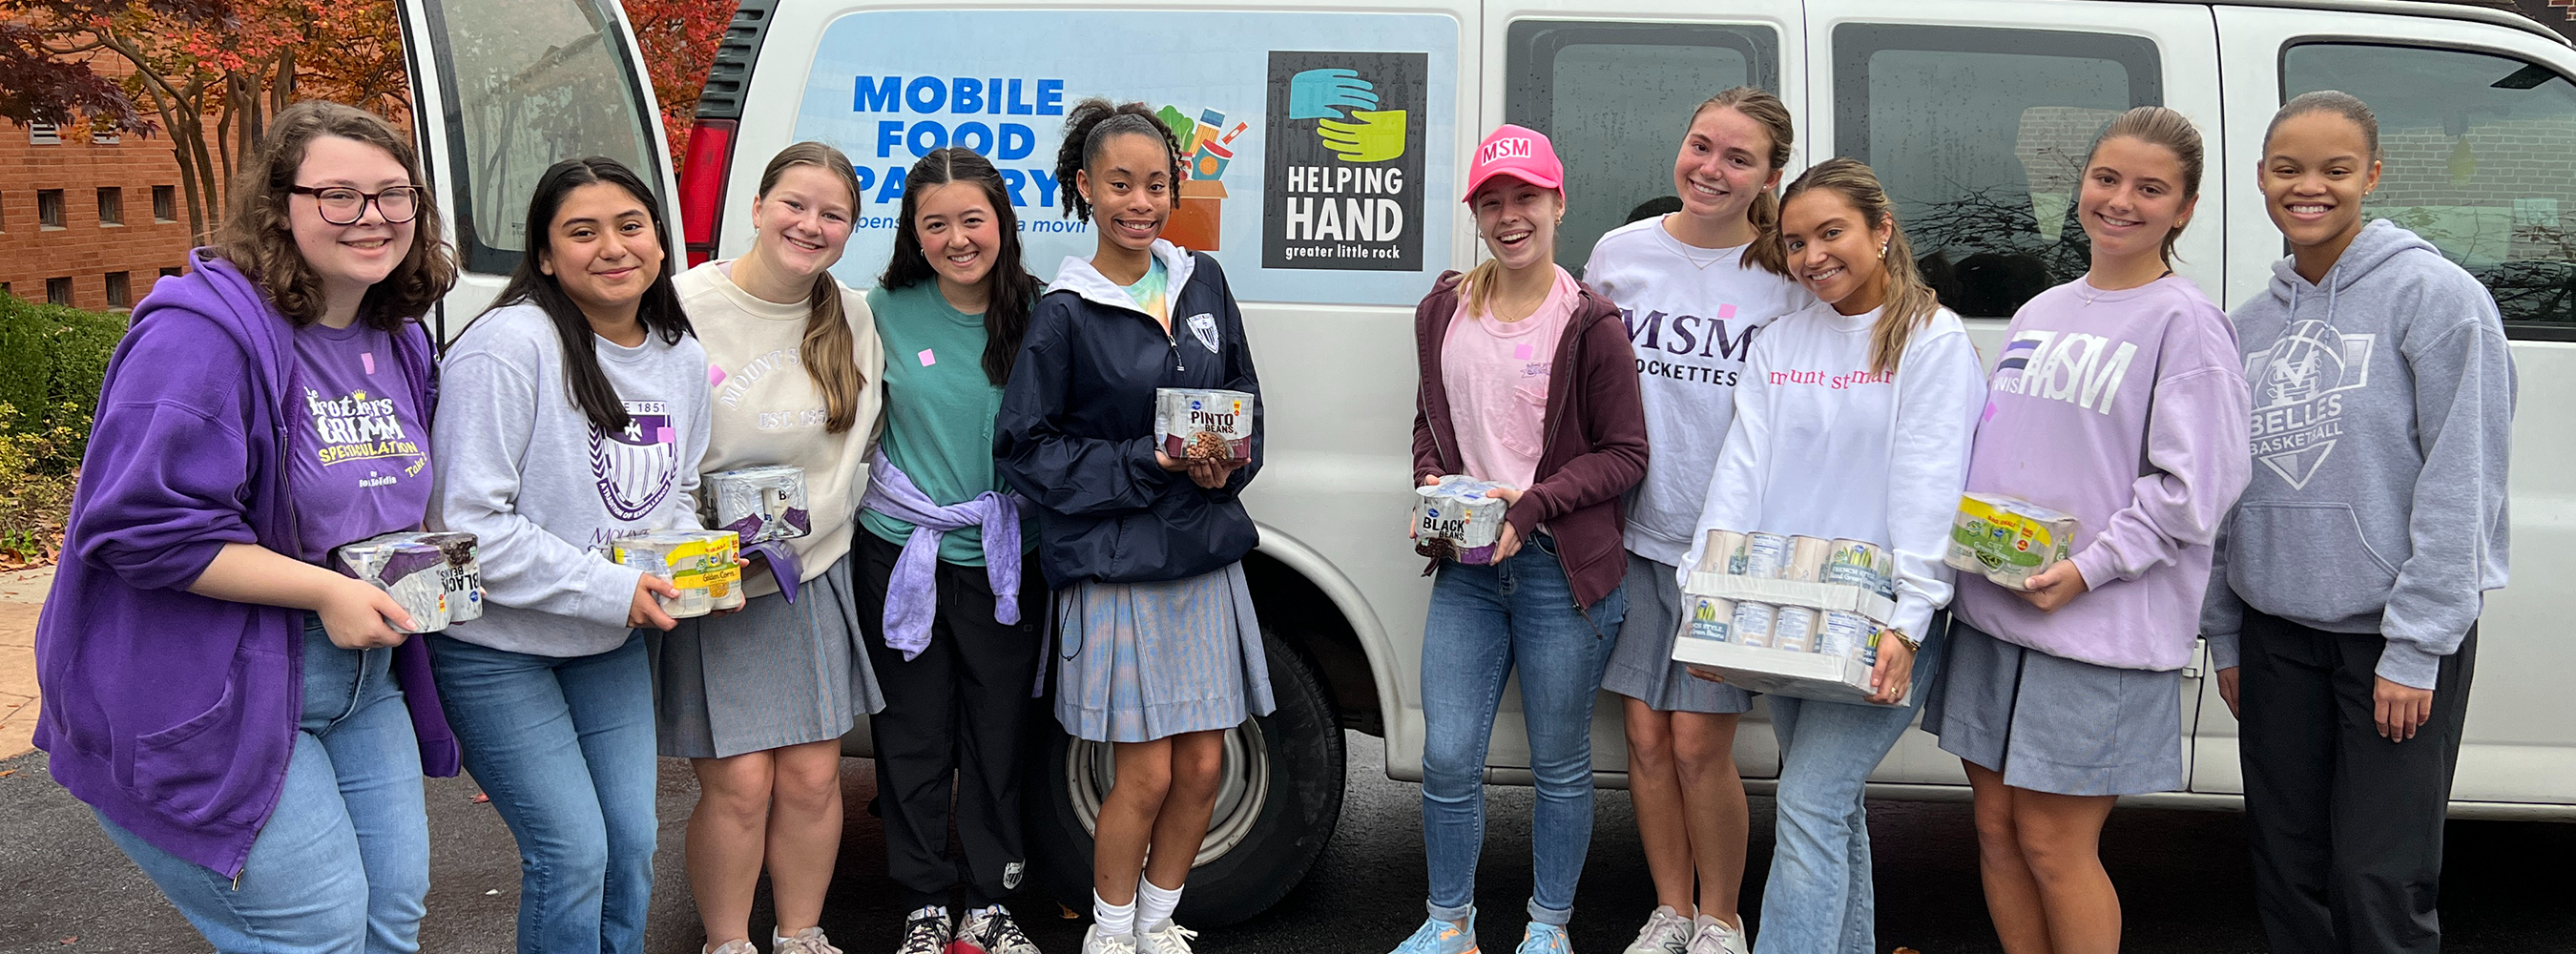 students holding donated canned food items in front of Mobile Food Pantry van